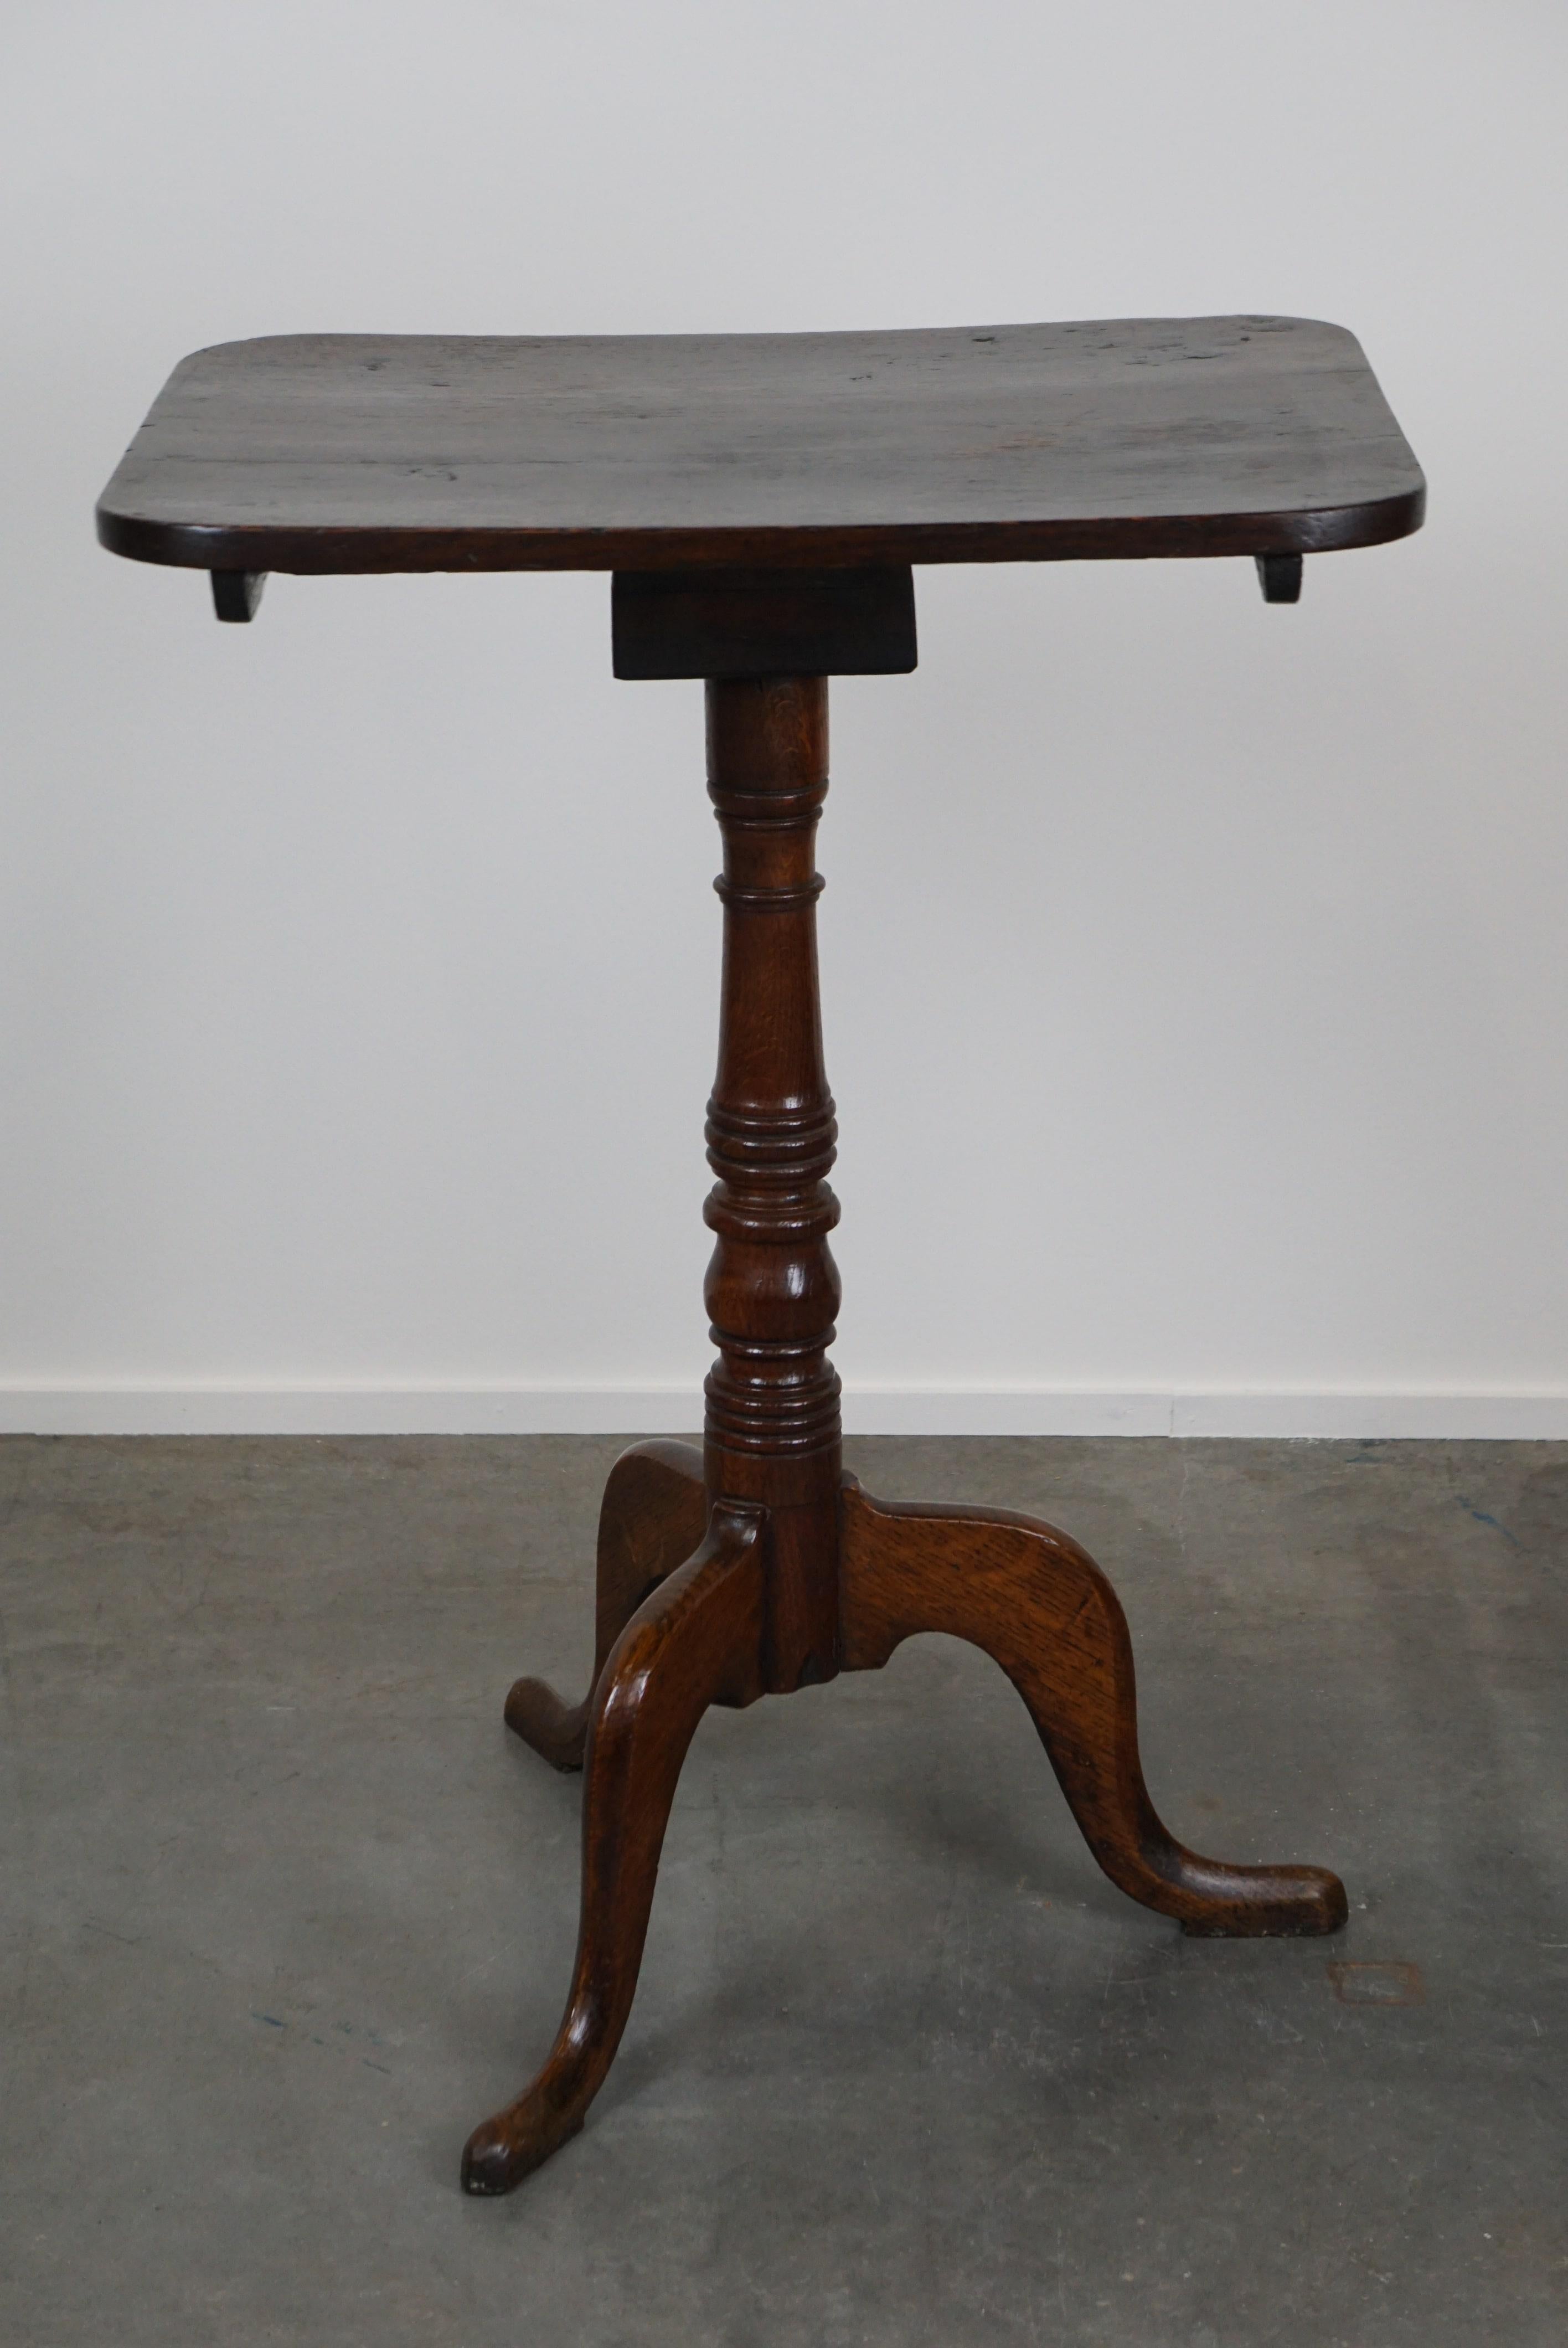 Offered is this nice antique English tilt-top table/side table with a square top. This charming table is in a good condition and the original tilting mechanism still works well. It's great to use as a side table next to the sofa or in the